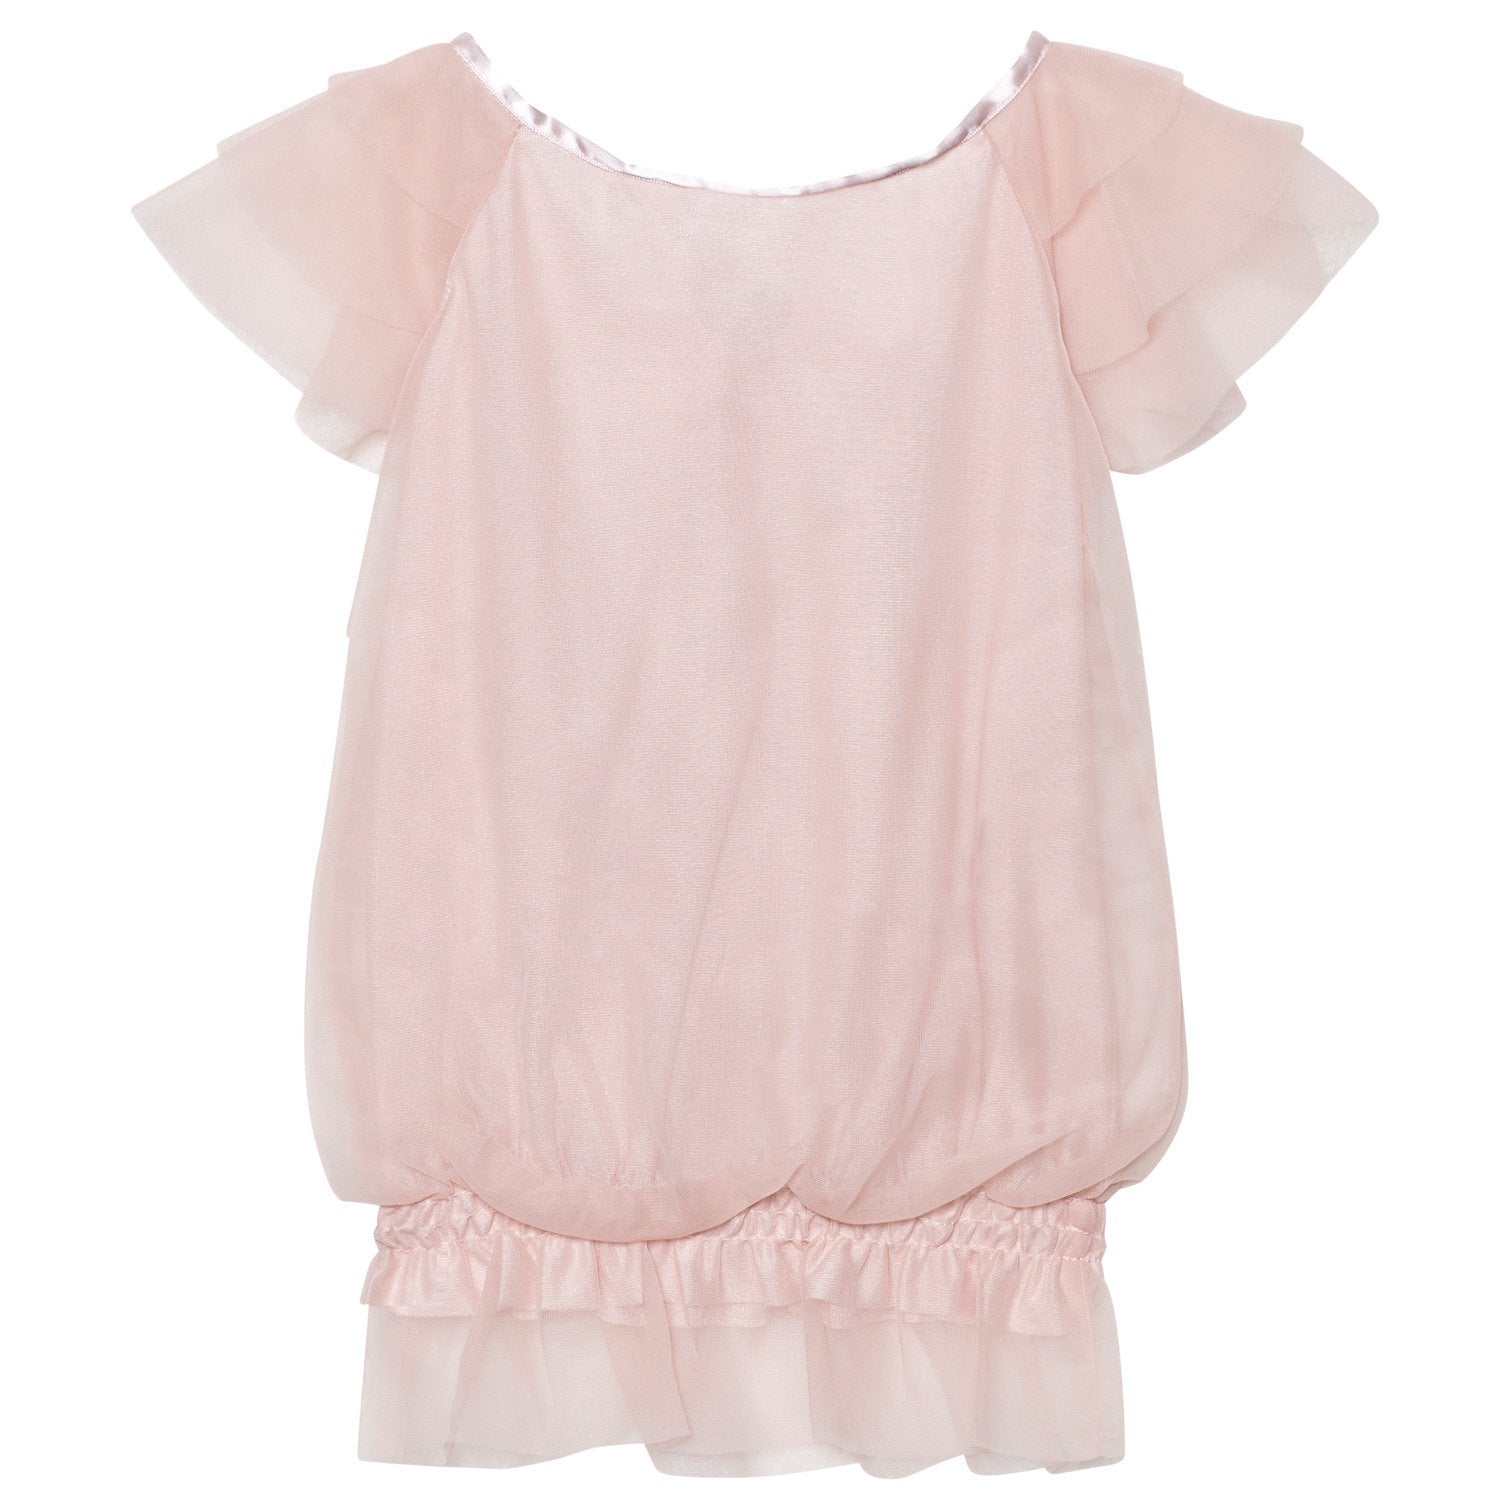 DOLLY by Le Petit Tom ® FAIRY TOP many colors - DOLLY by Le Petit Tom ®